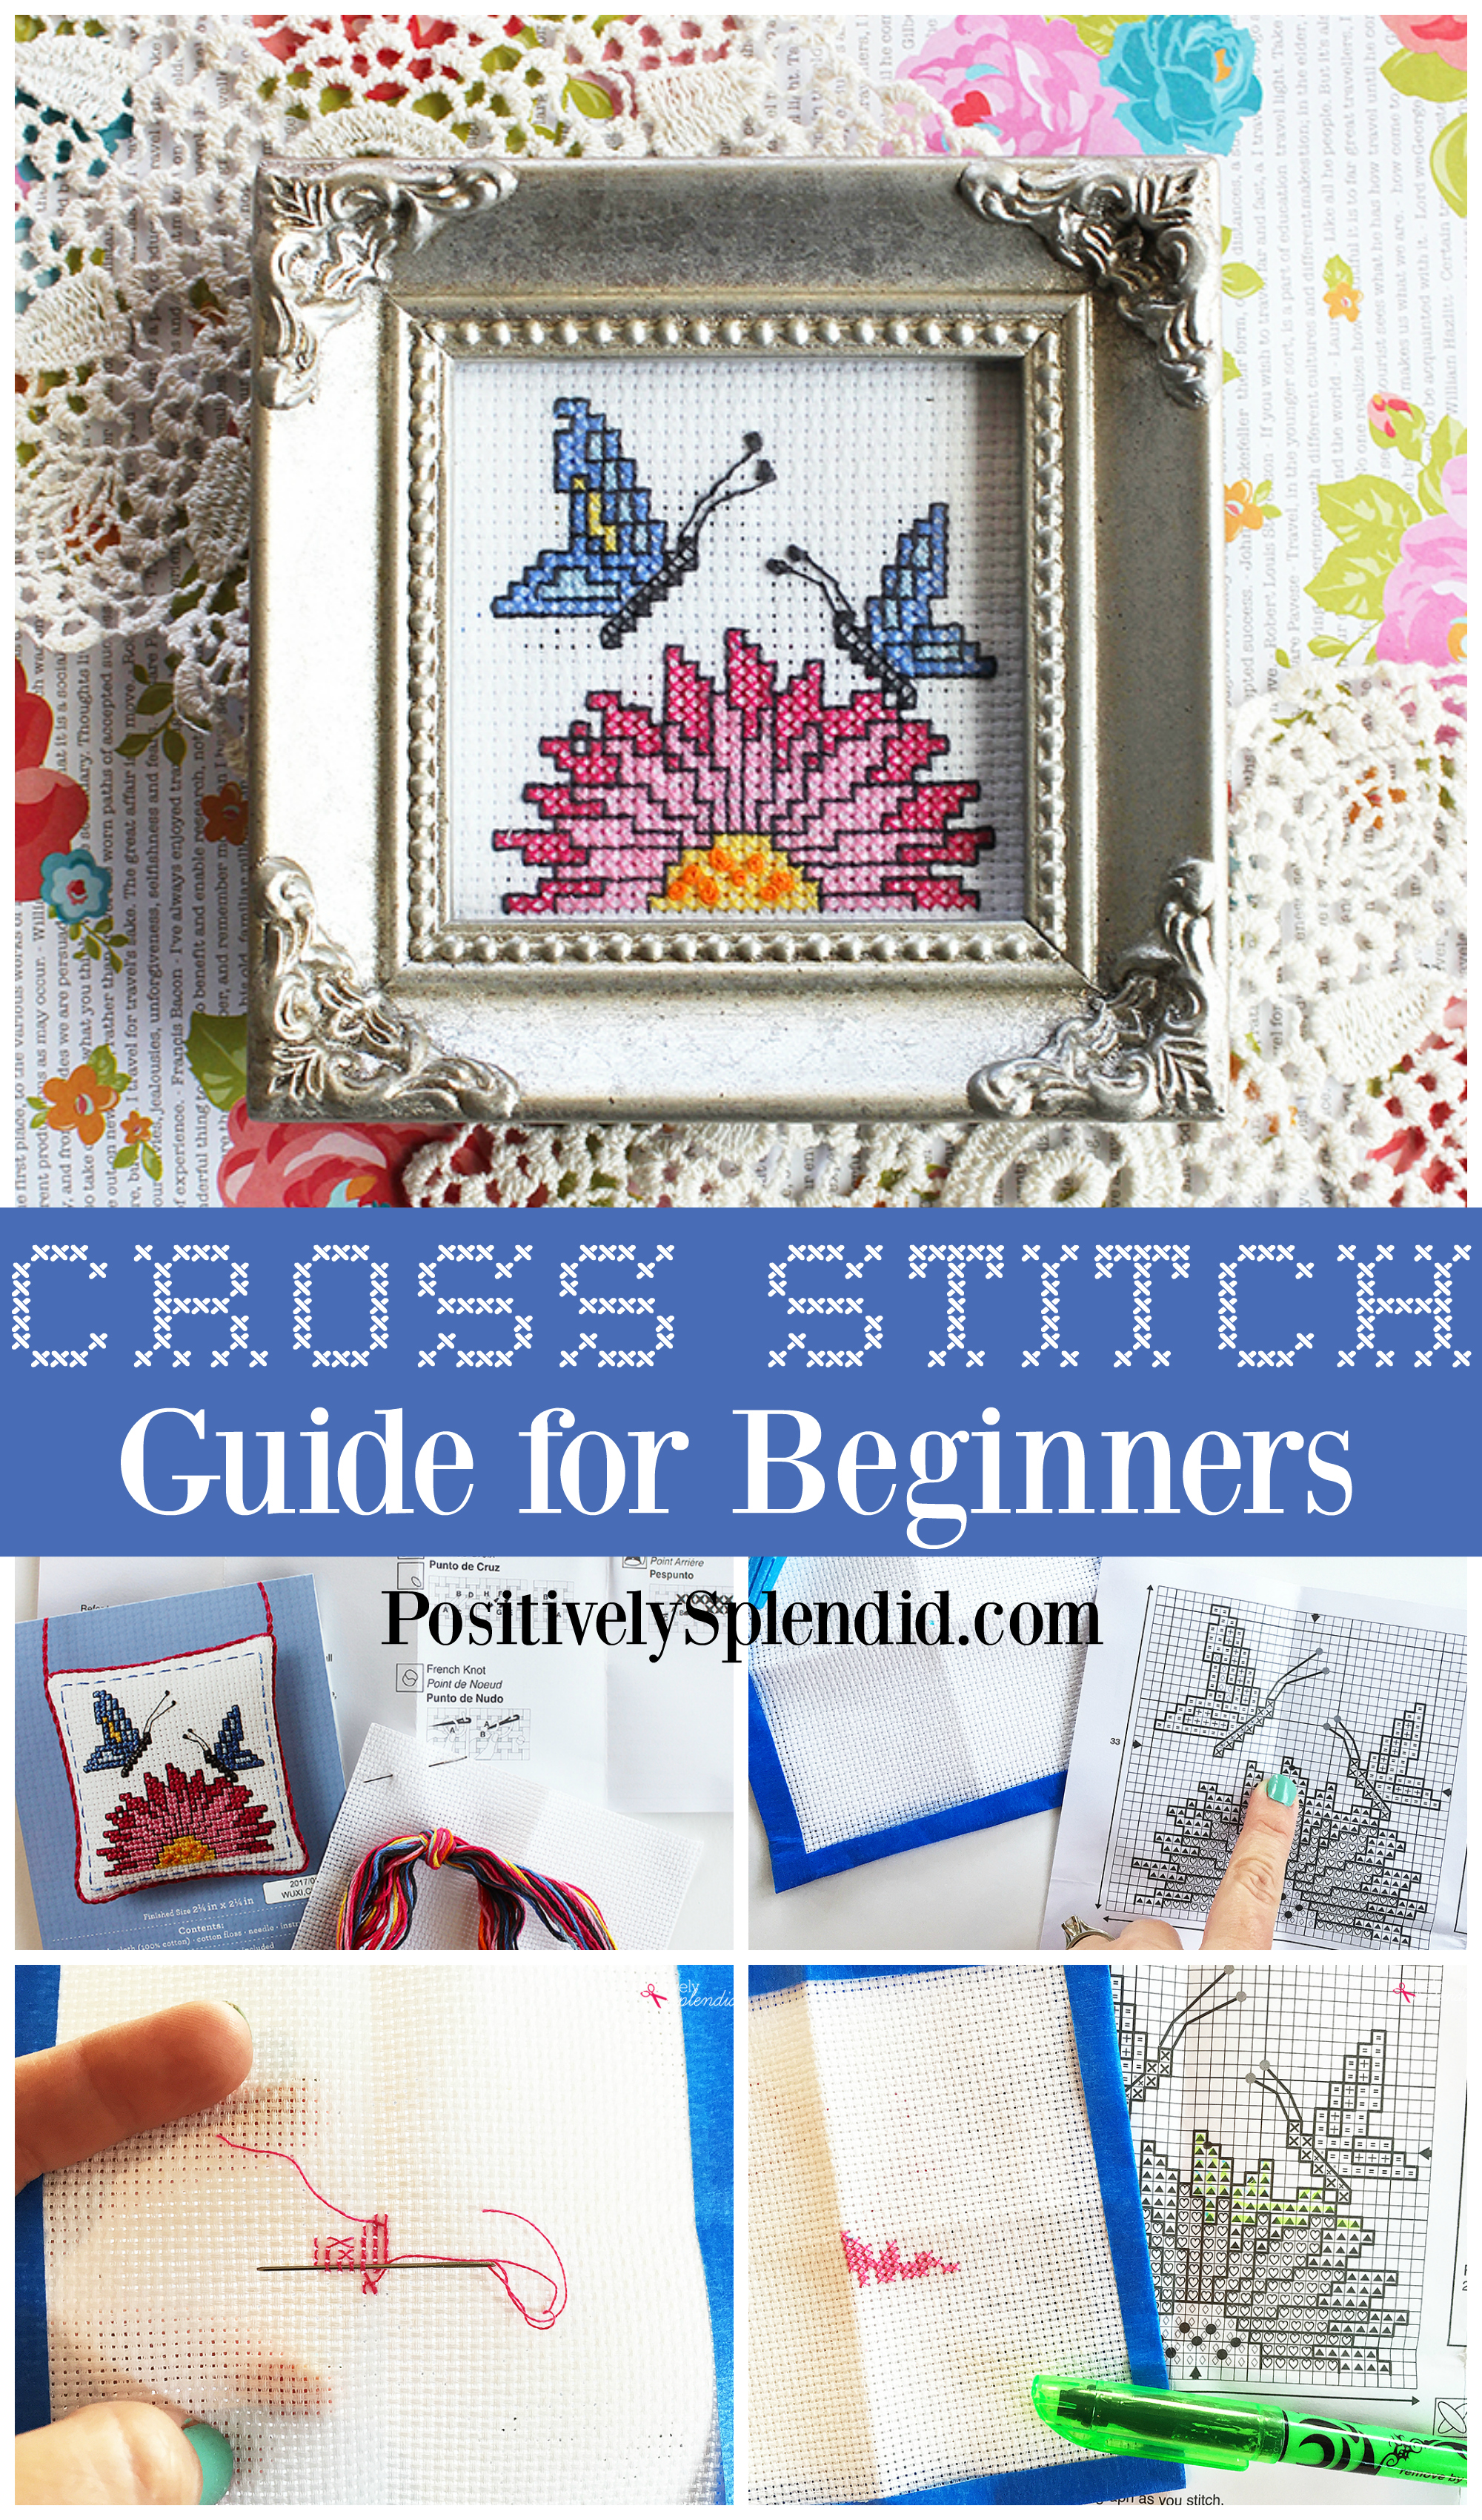 10 Helpful Cross Stitch Tips for Beginners + Bucilla Giveaway! - Positively  Splendid {Crafts, Sewing, Recipes and Home Decor}